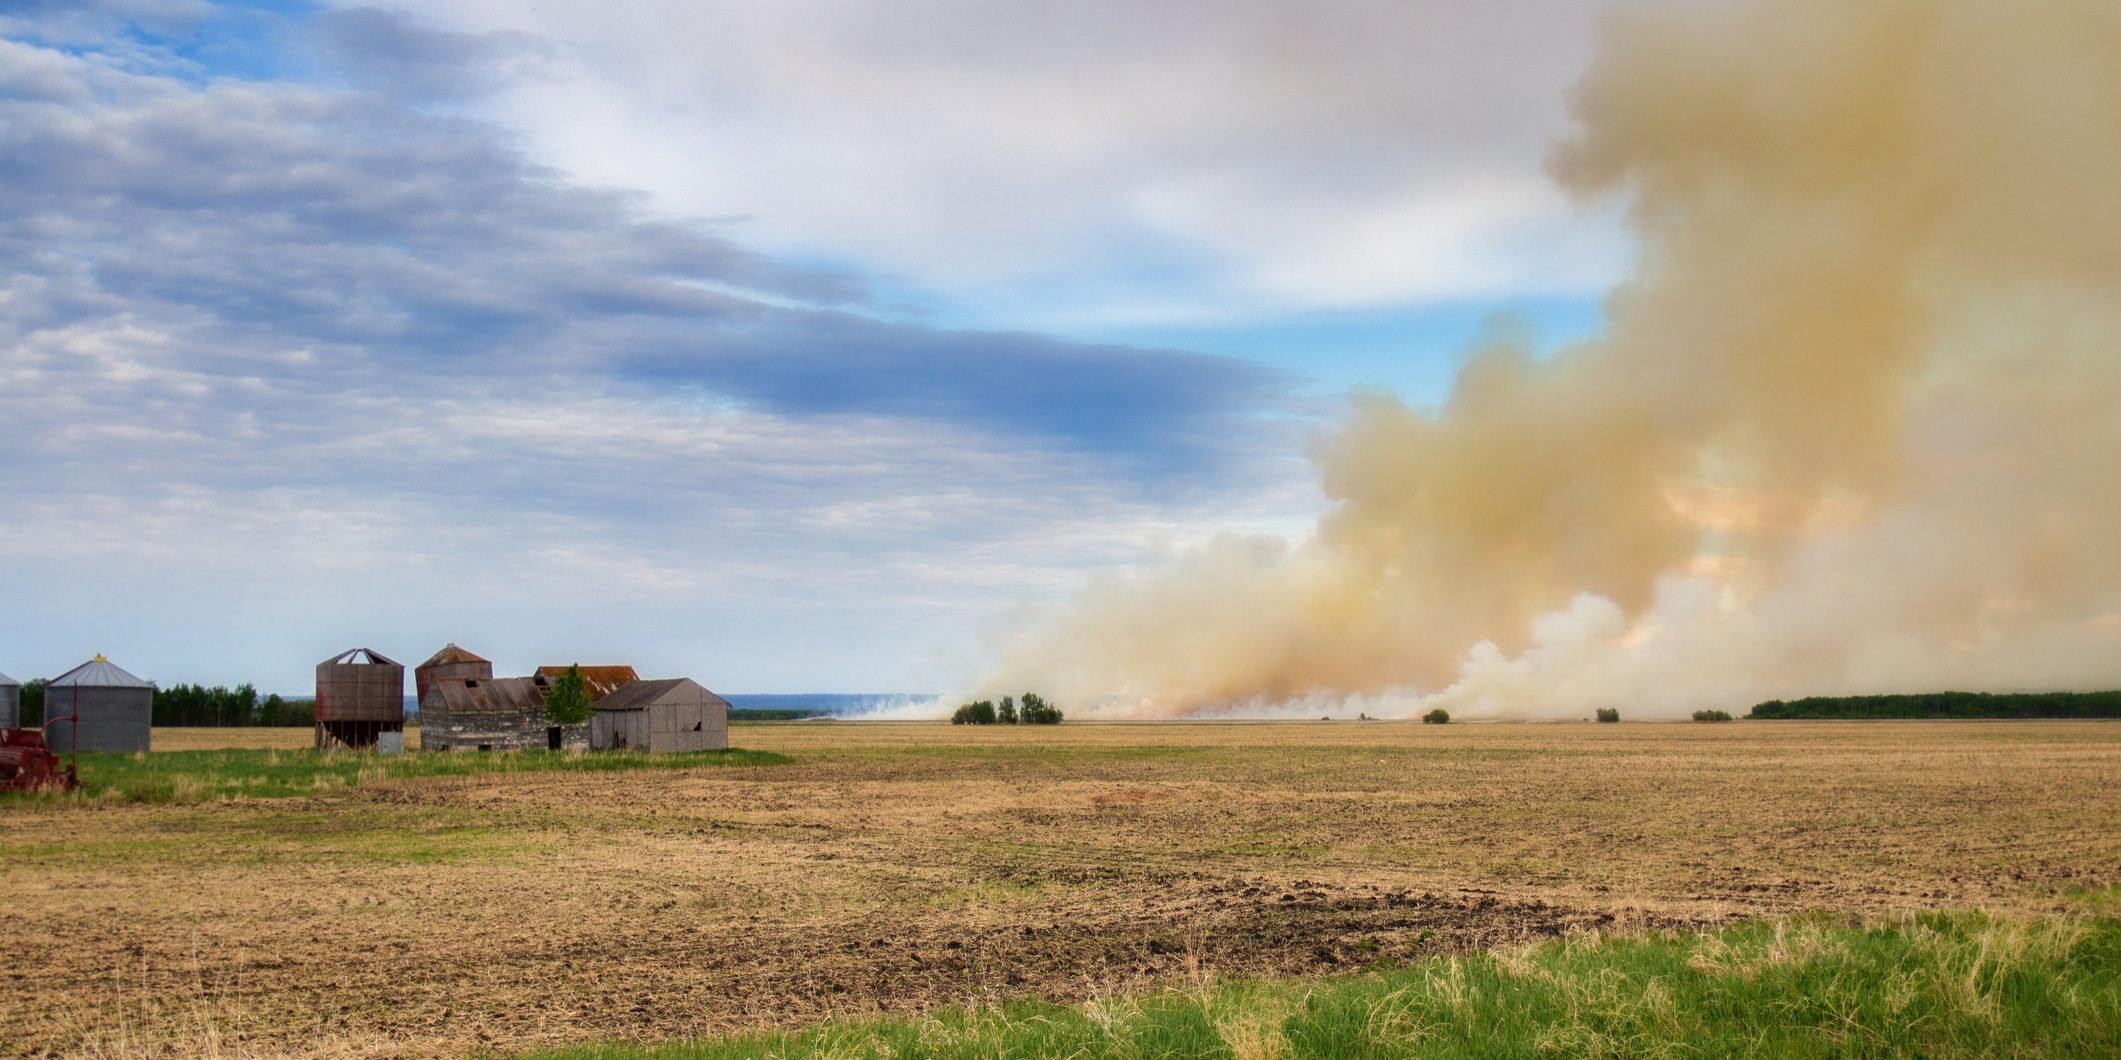 Billowing clouds of smoke from a fire burning a farm field with old sheds nearby in a summer landscape